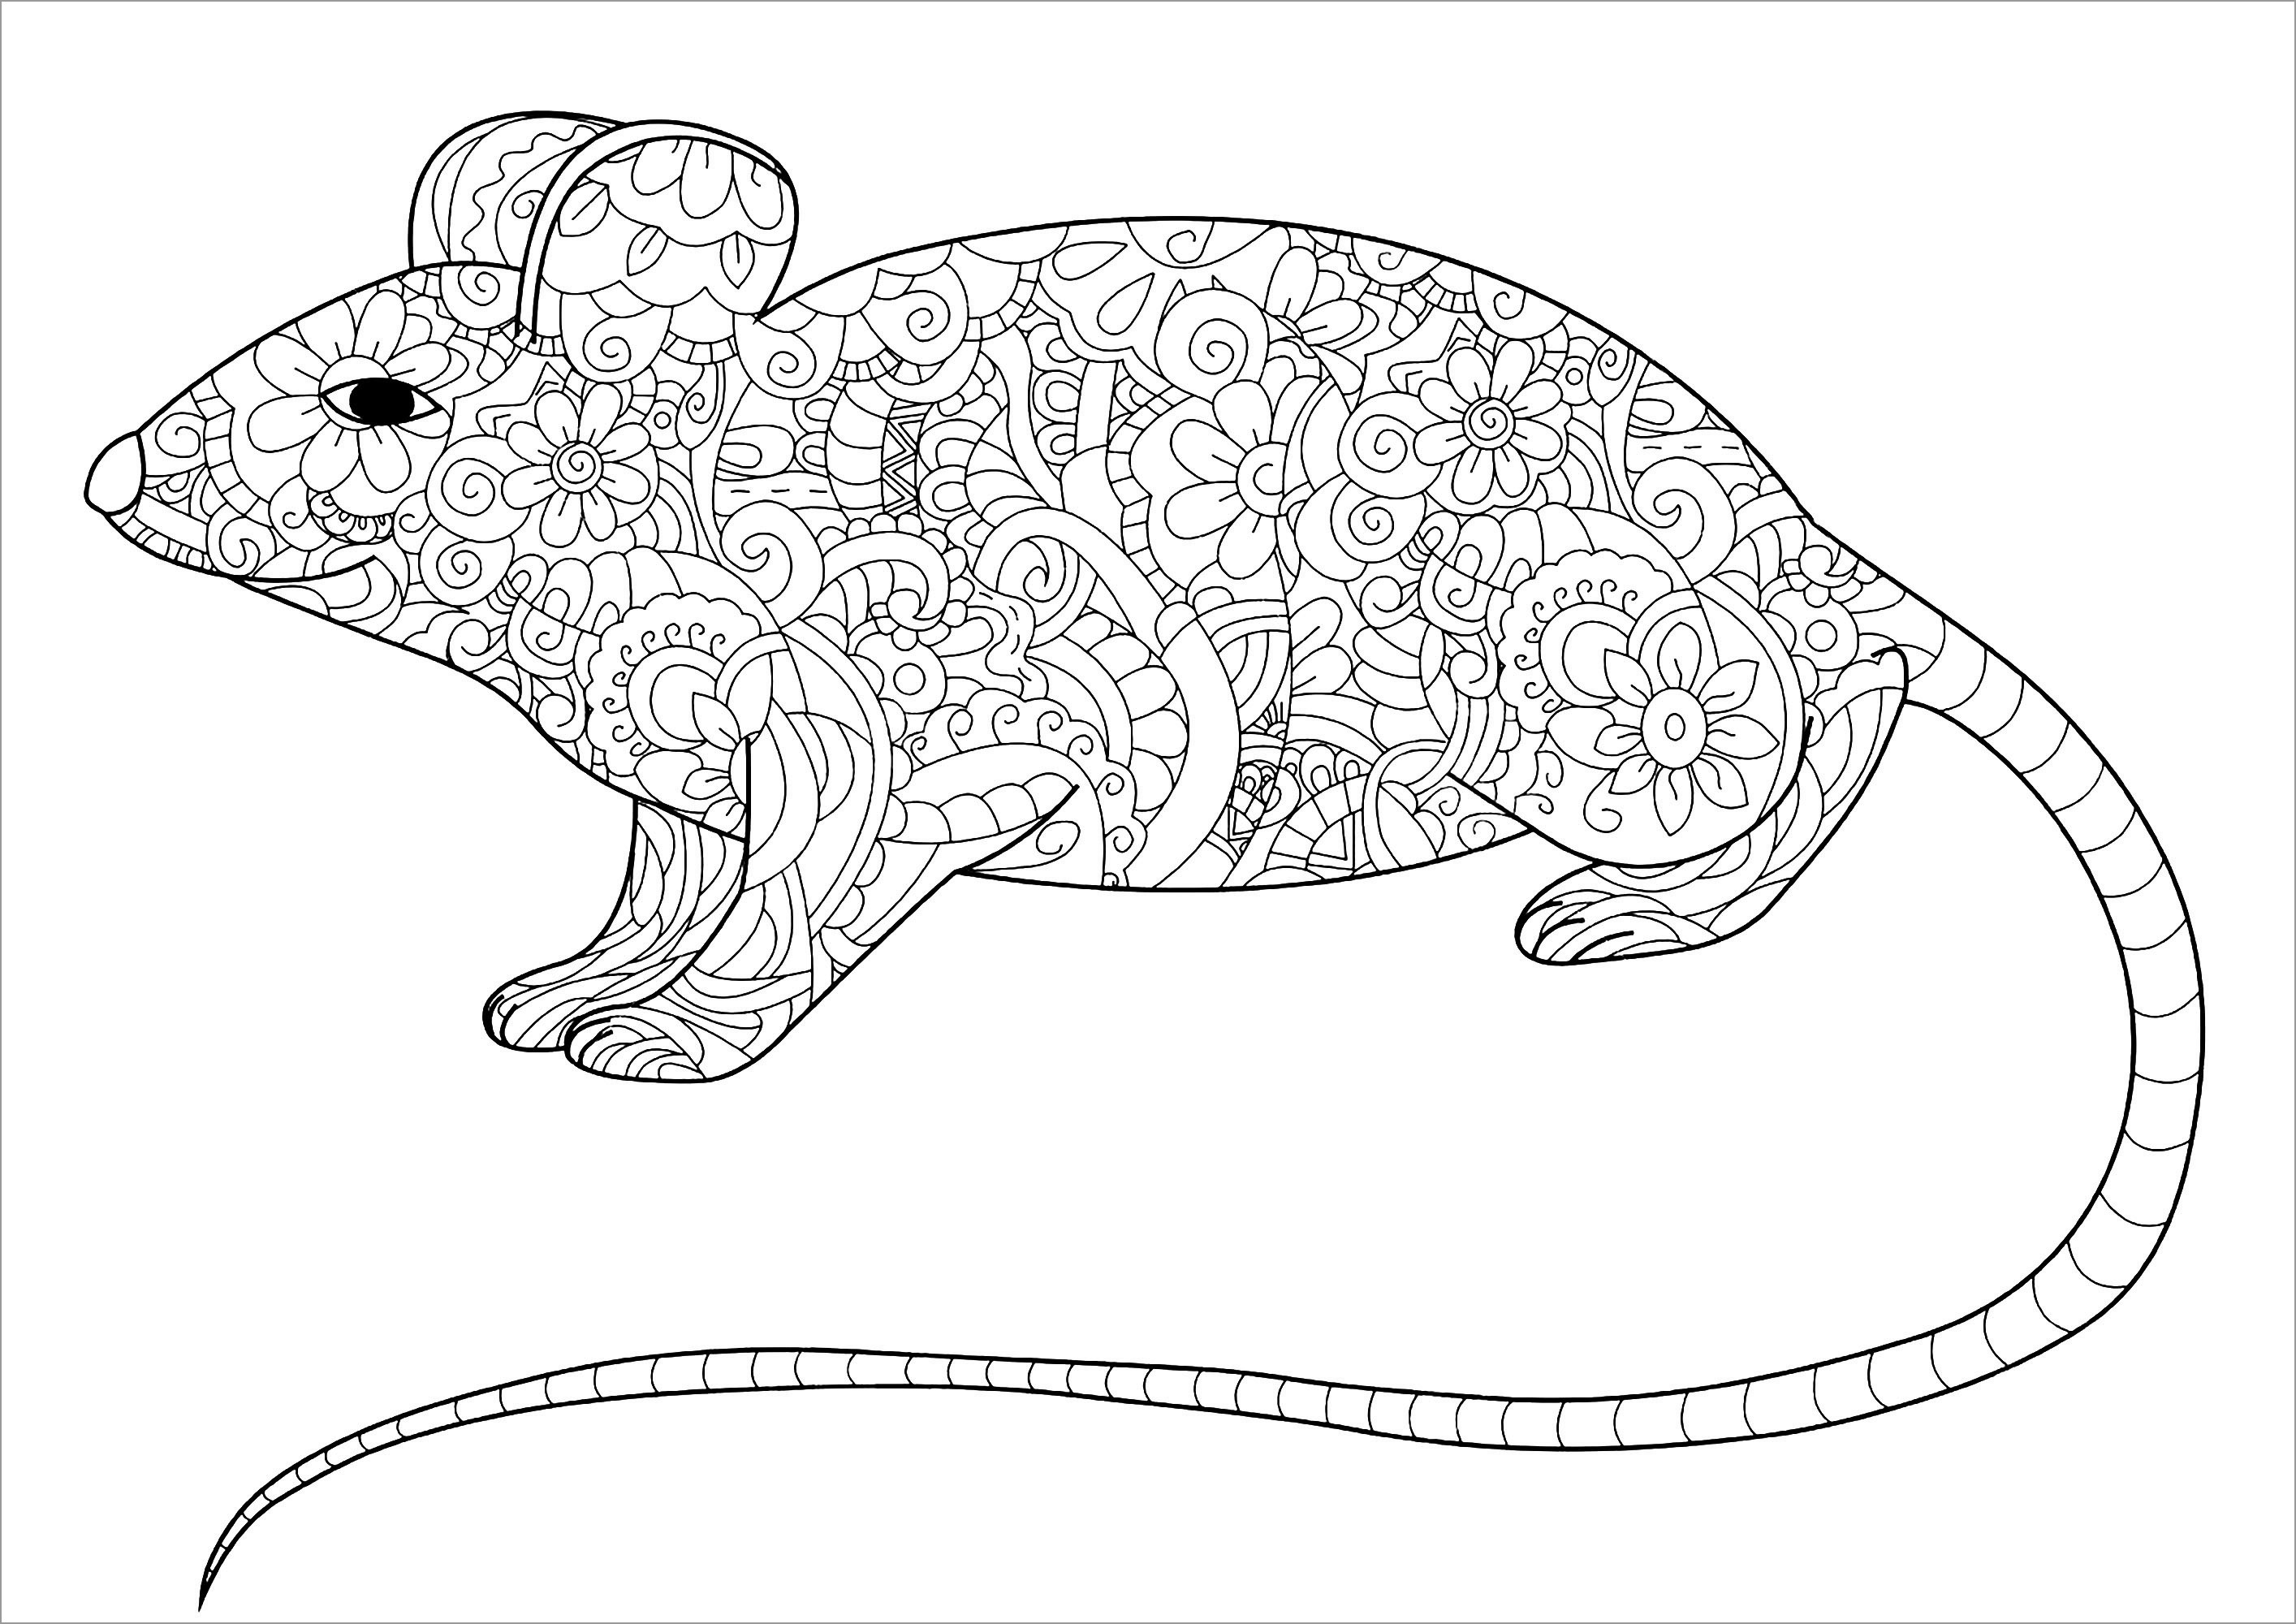 Mandala Zentangle Rat Coloring Page for Adult